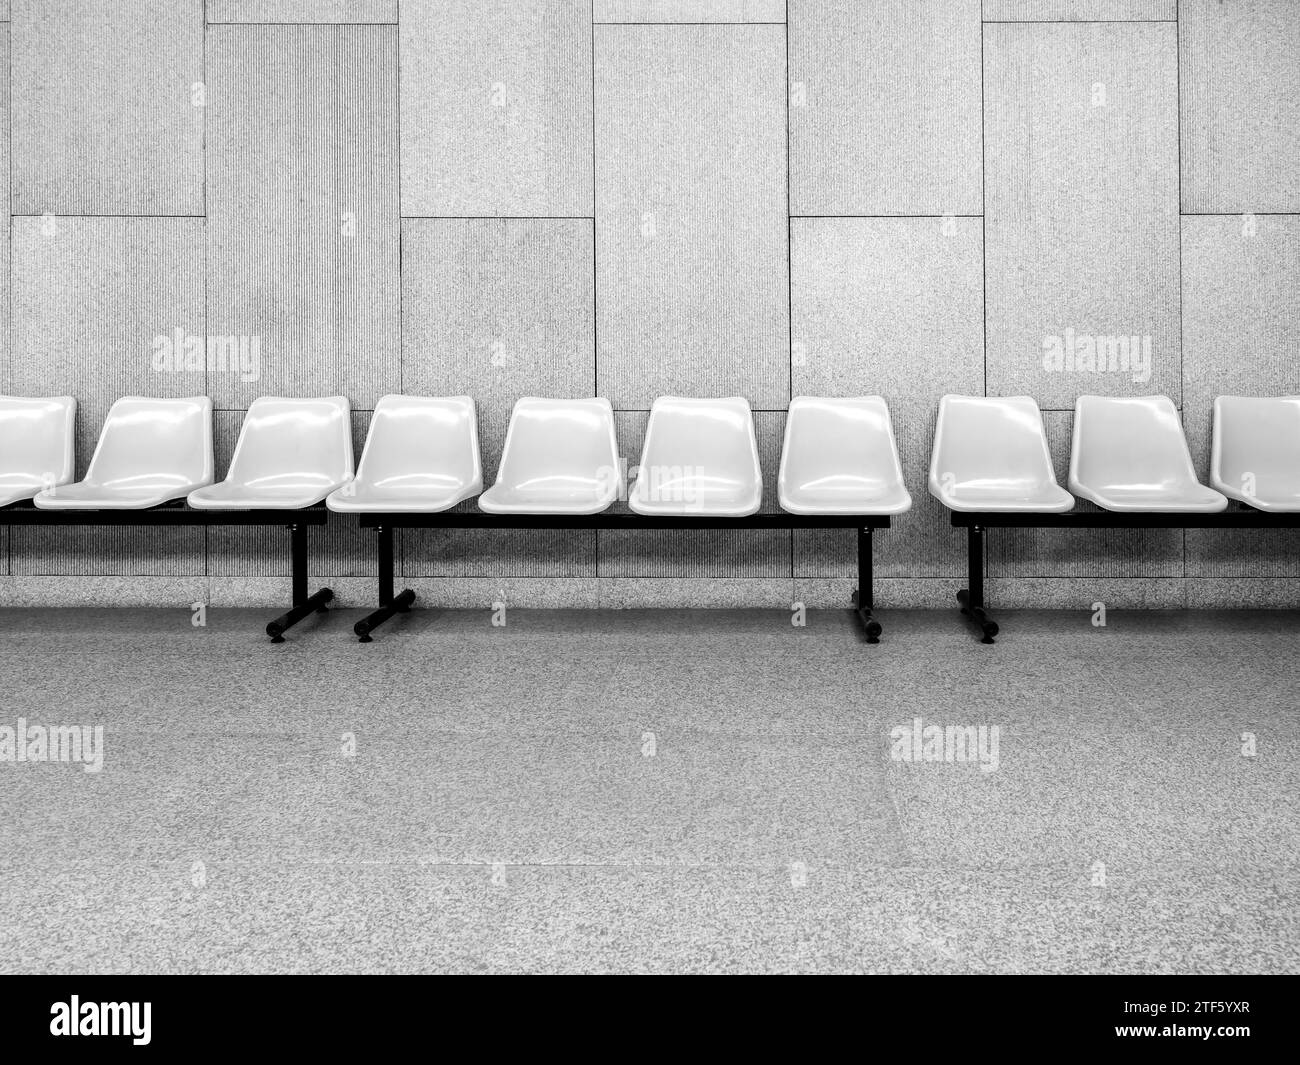 Row of empty white waiting plastic chairs seats with black iron legs seats on grey tiles and concrete wall background inside the modern building with Stock Photo